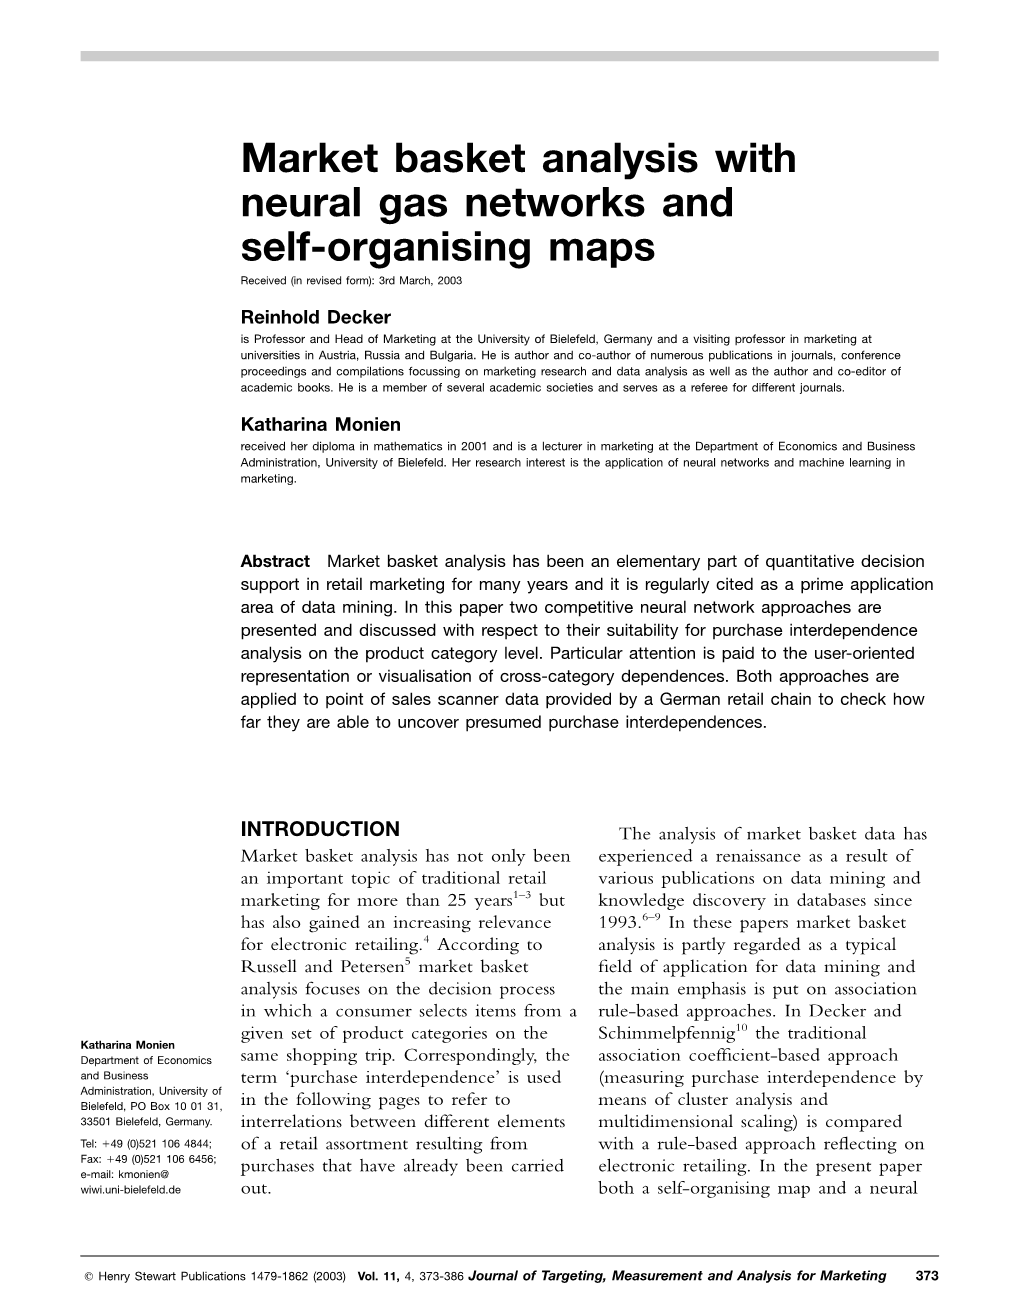 Market Basket Analysis with Neural Gas Networks and Self-Organising Maps Received (In Revised Form): 3Rd March, 2003